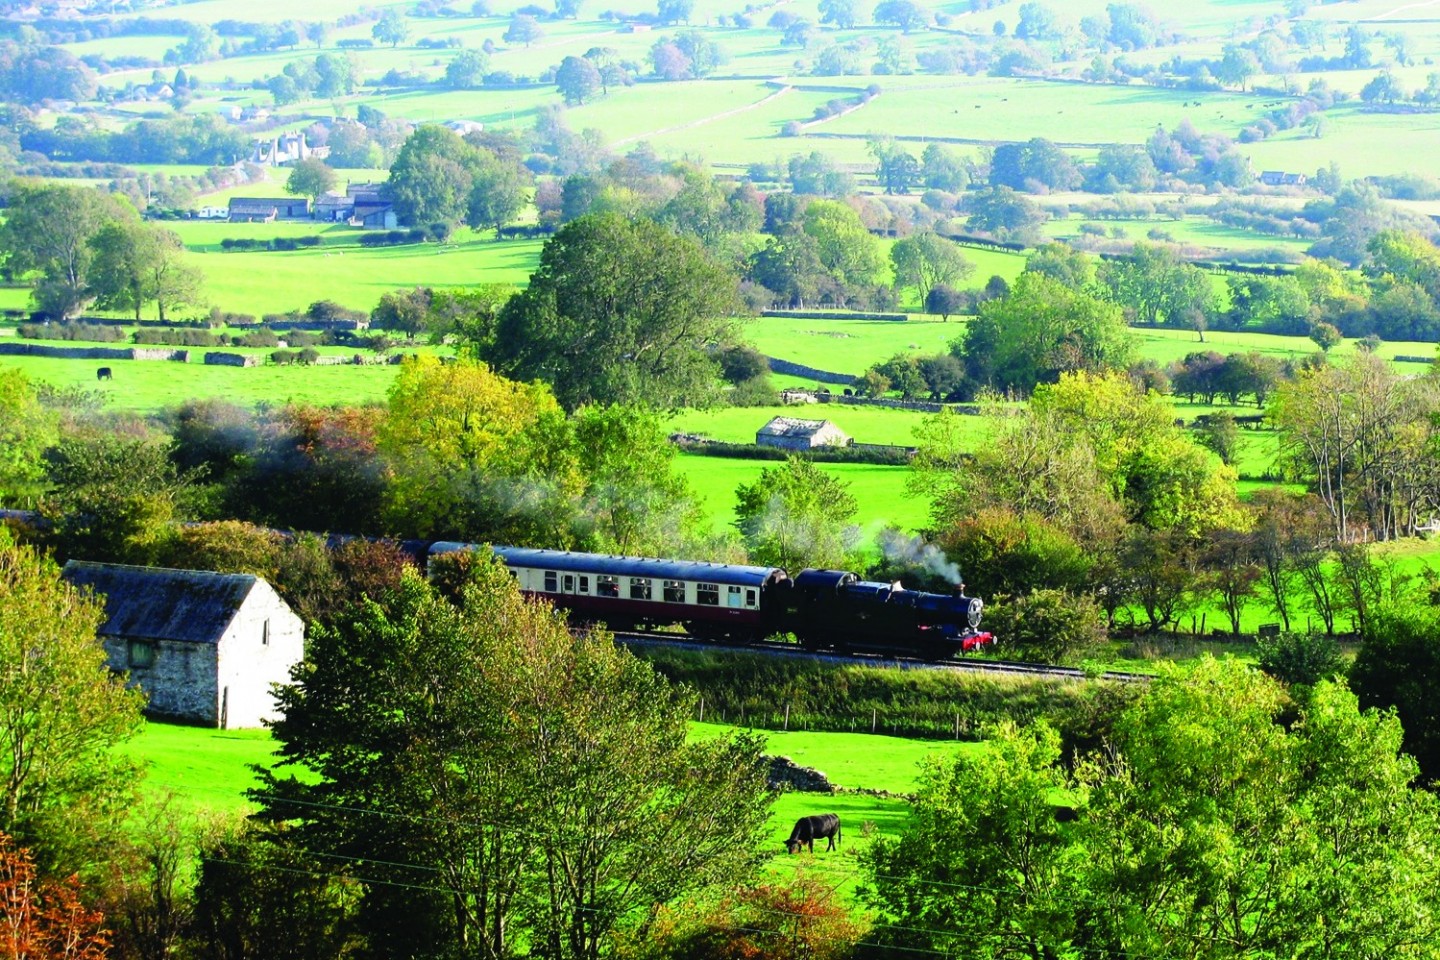 visit yorkshire by train